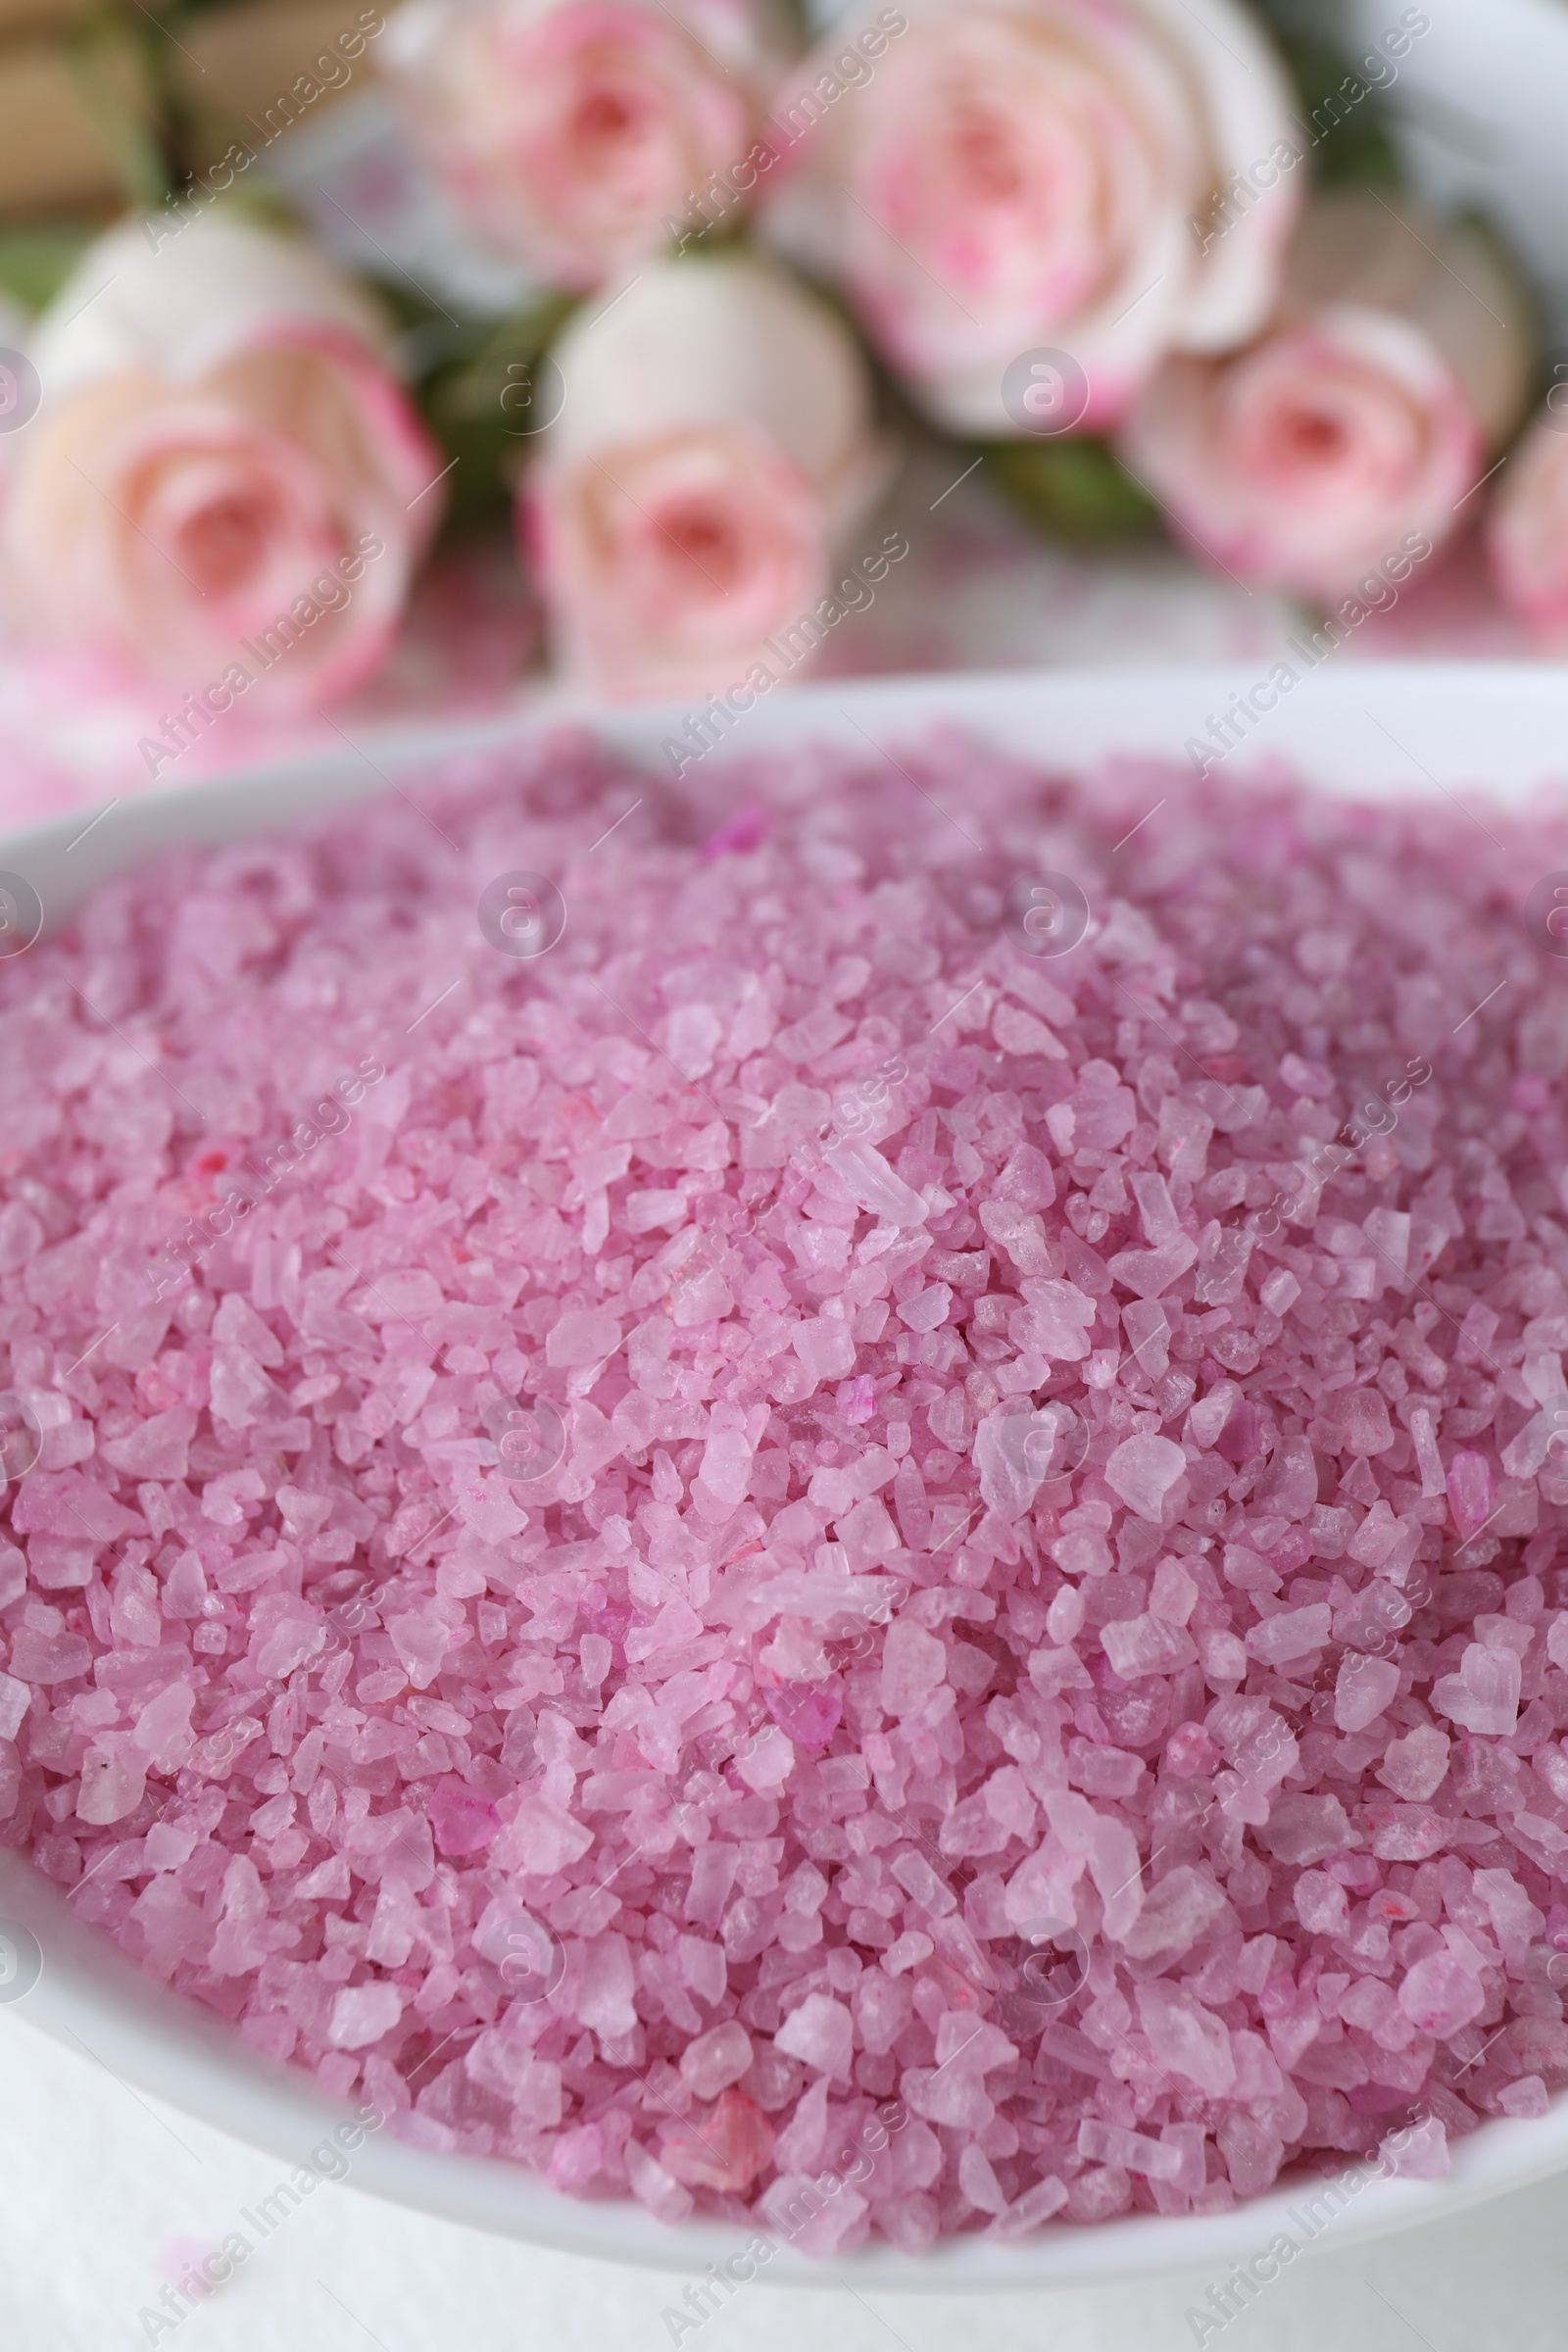 Photo of Bowl with pink sea salt on blurred background, closeup